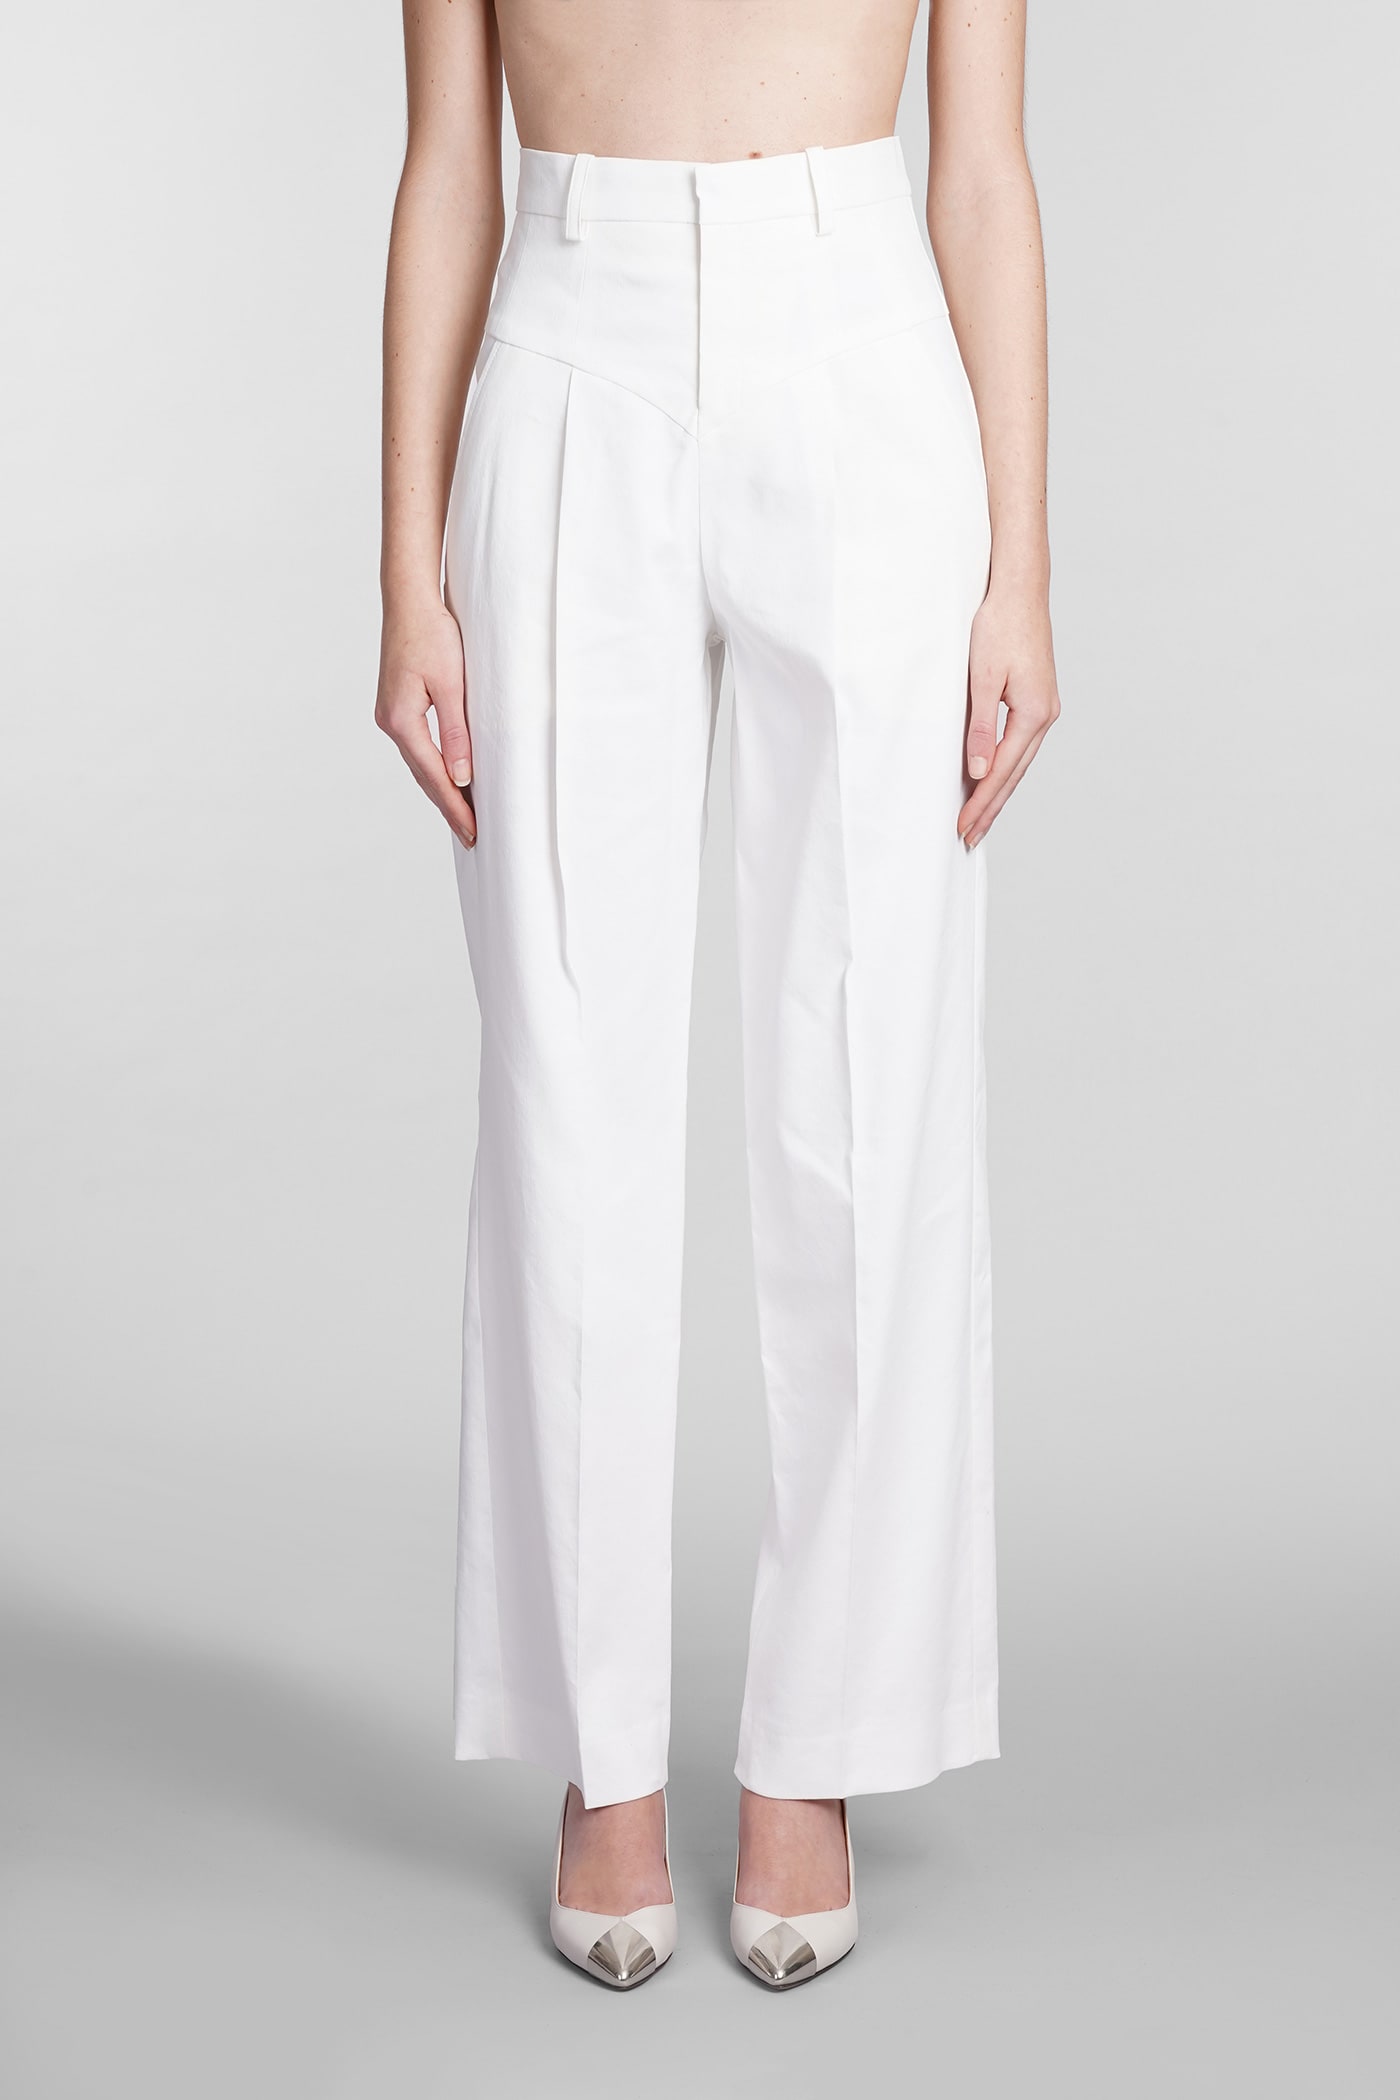 Shop Isabel Marant Staya Pants In White Cotton